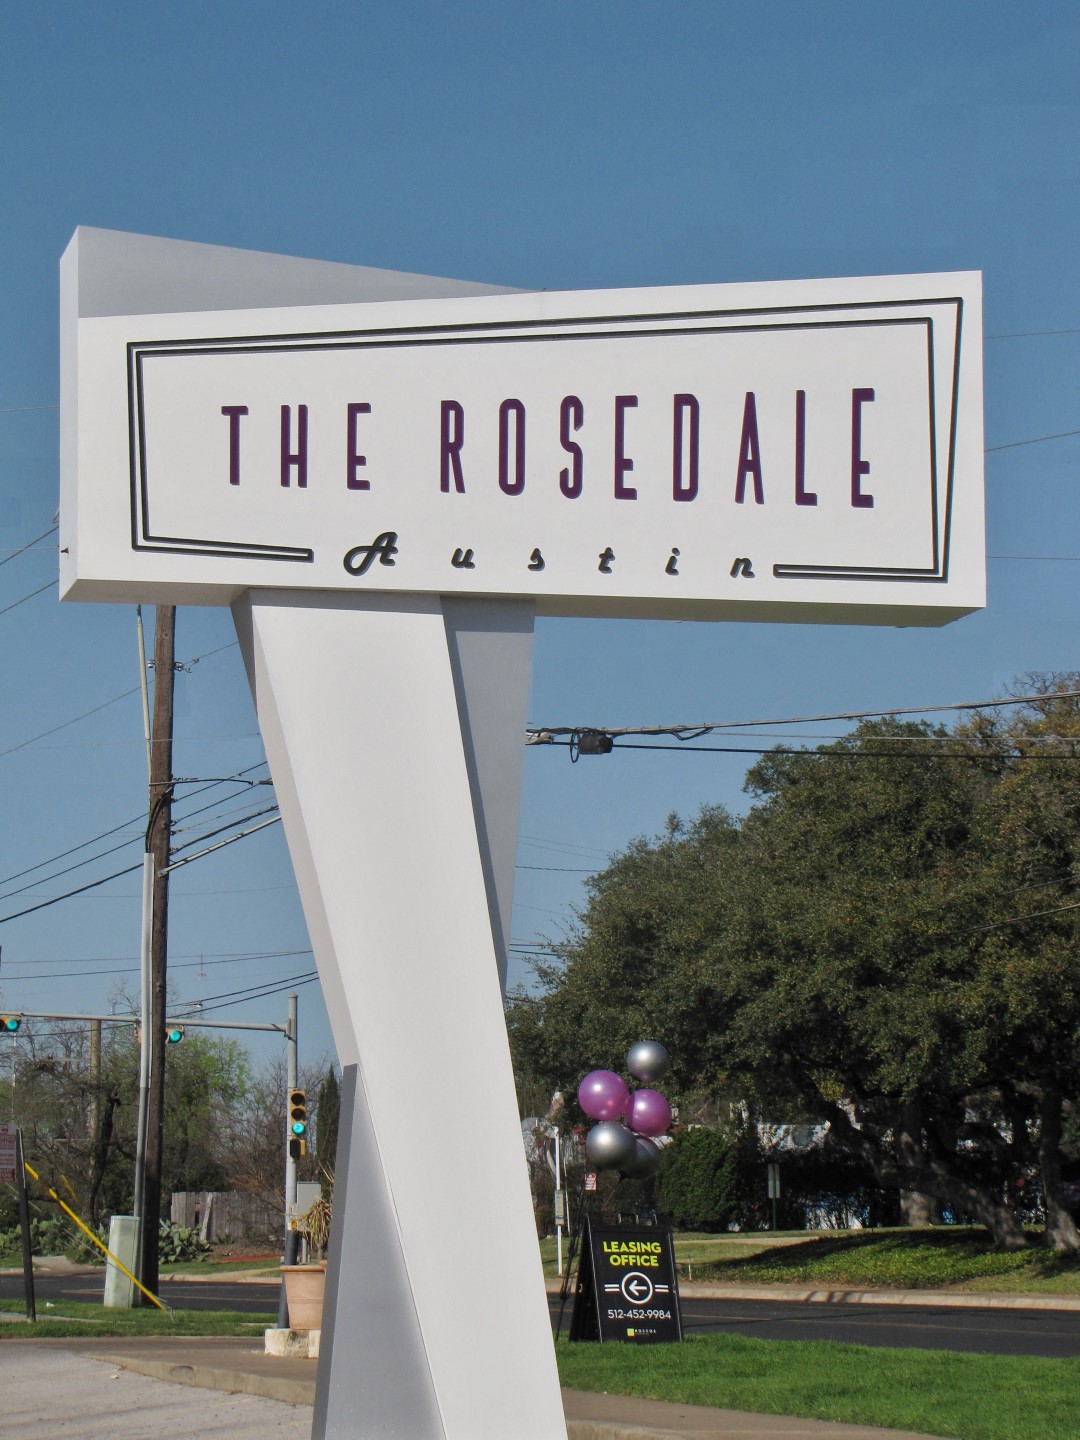 The Rosedale